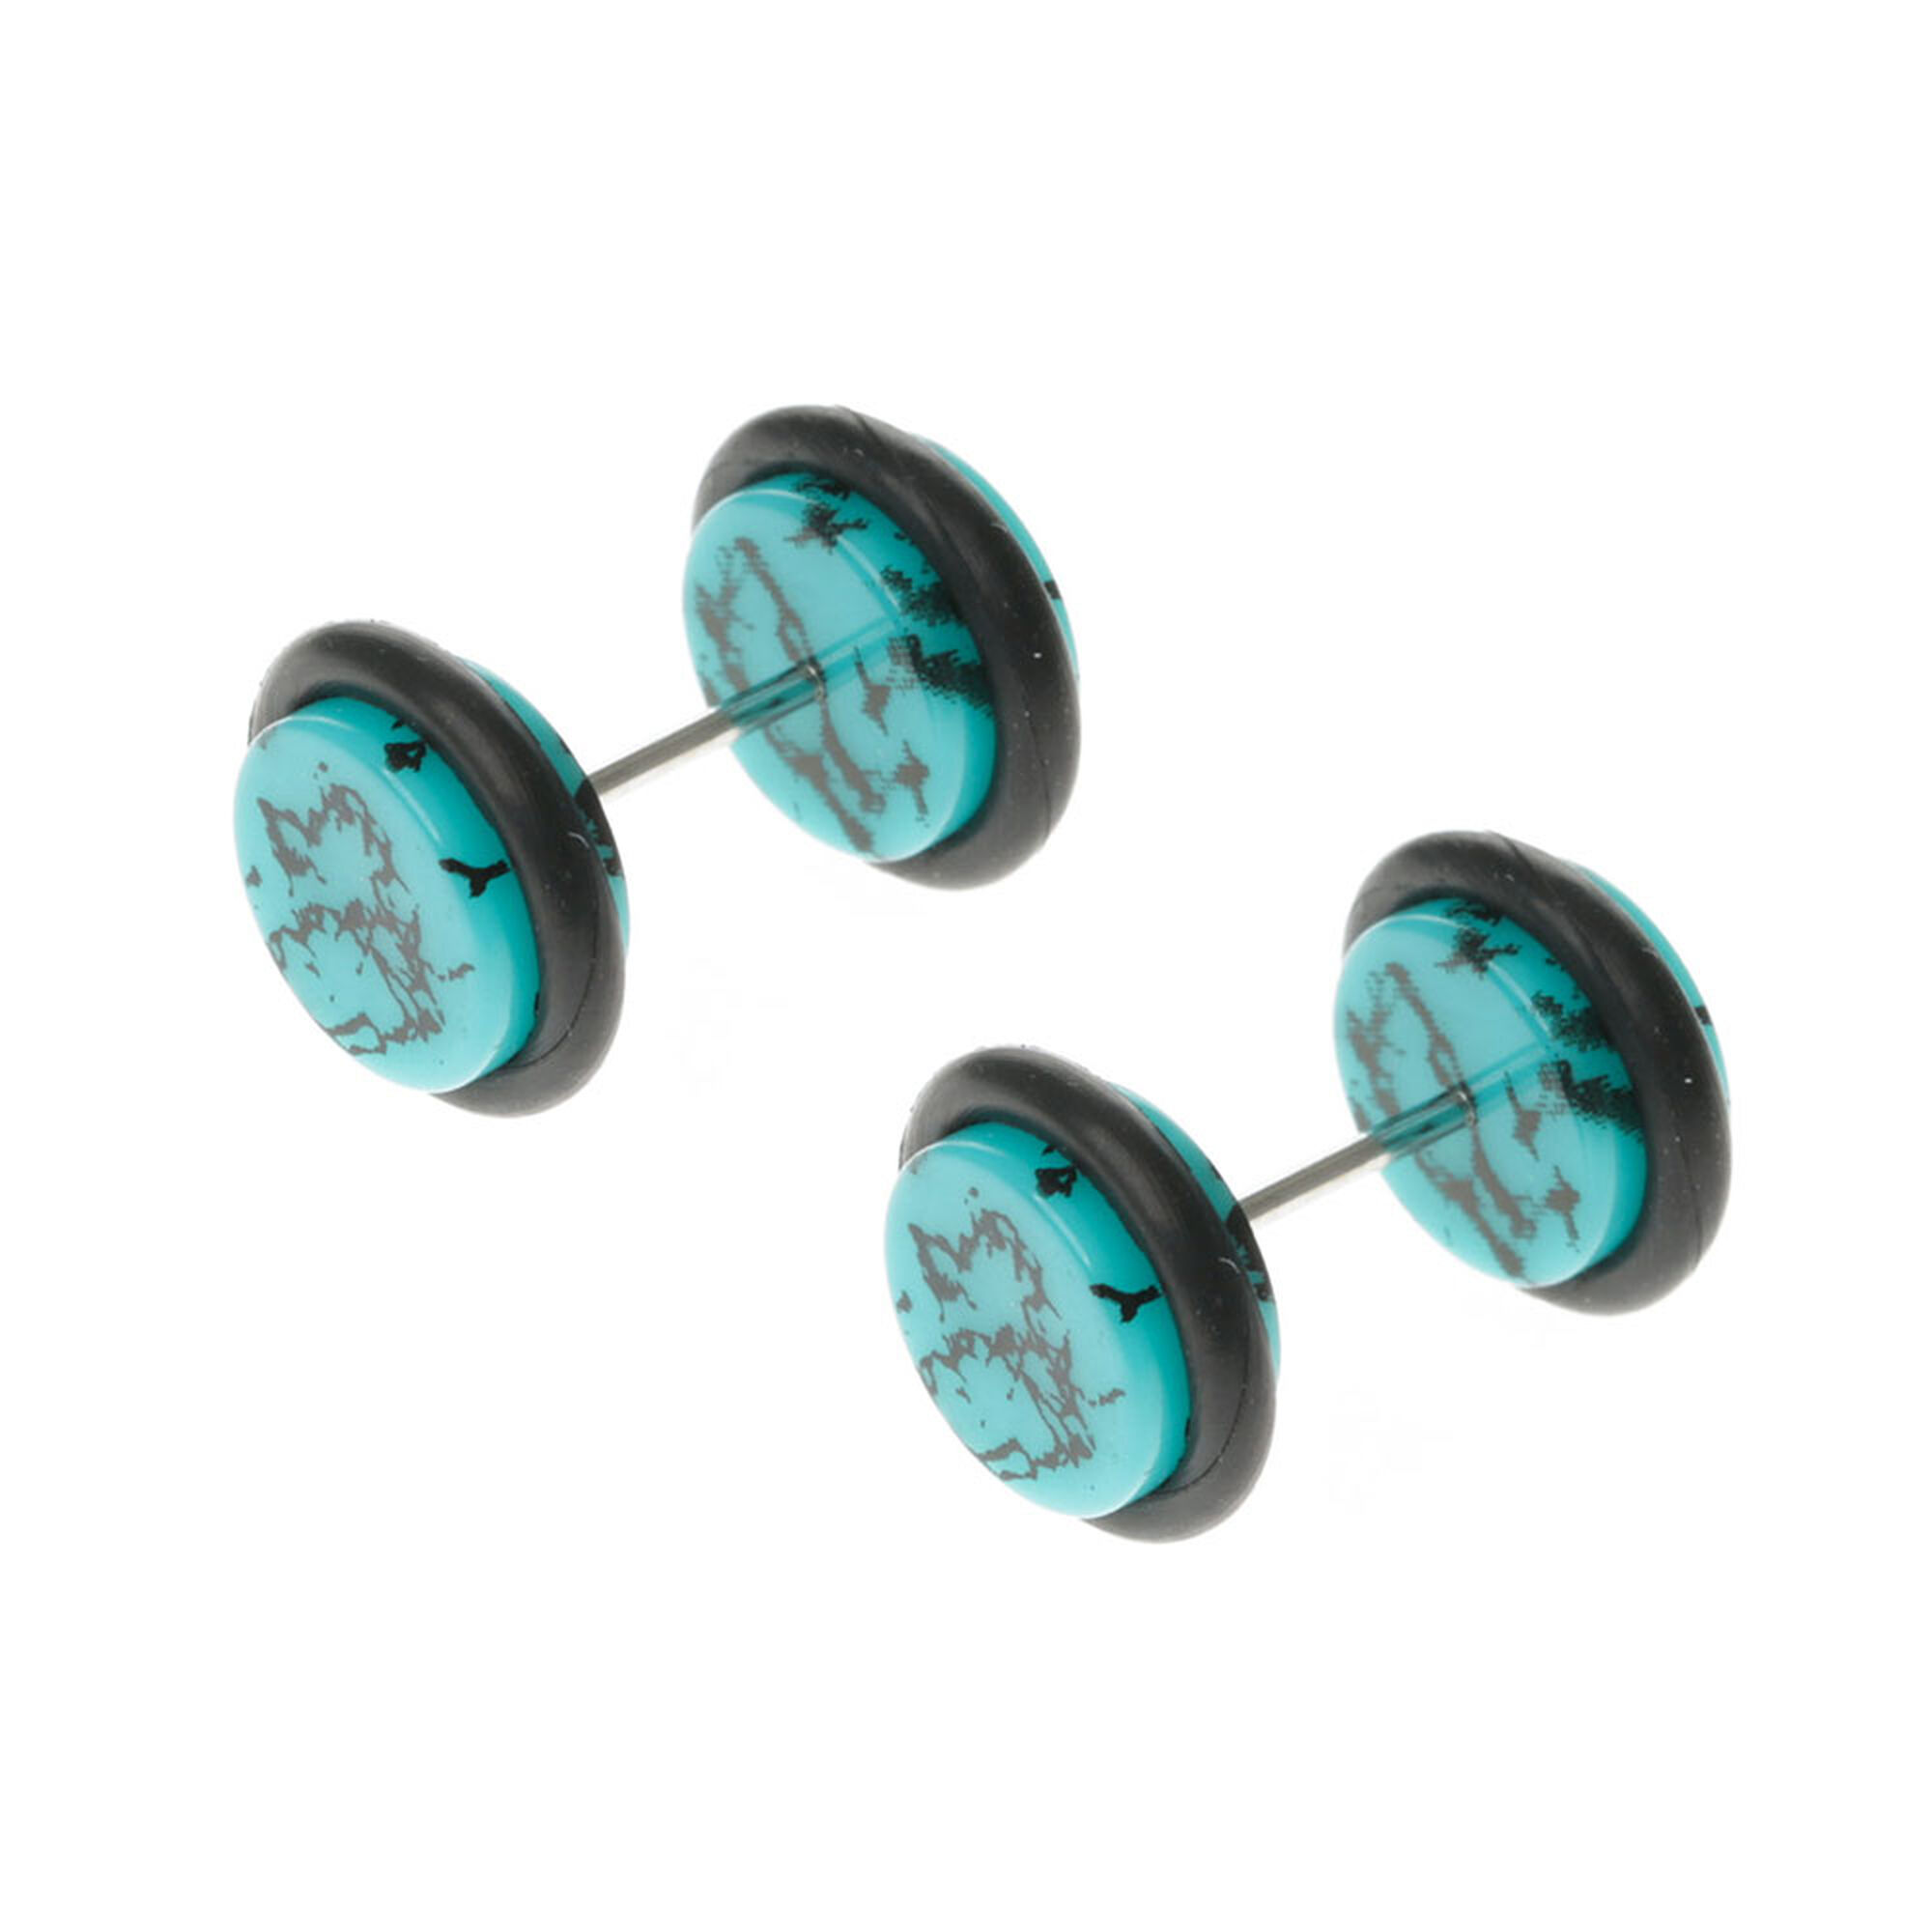 Turquoise Crackle Faux Ear Plugs | Claire's